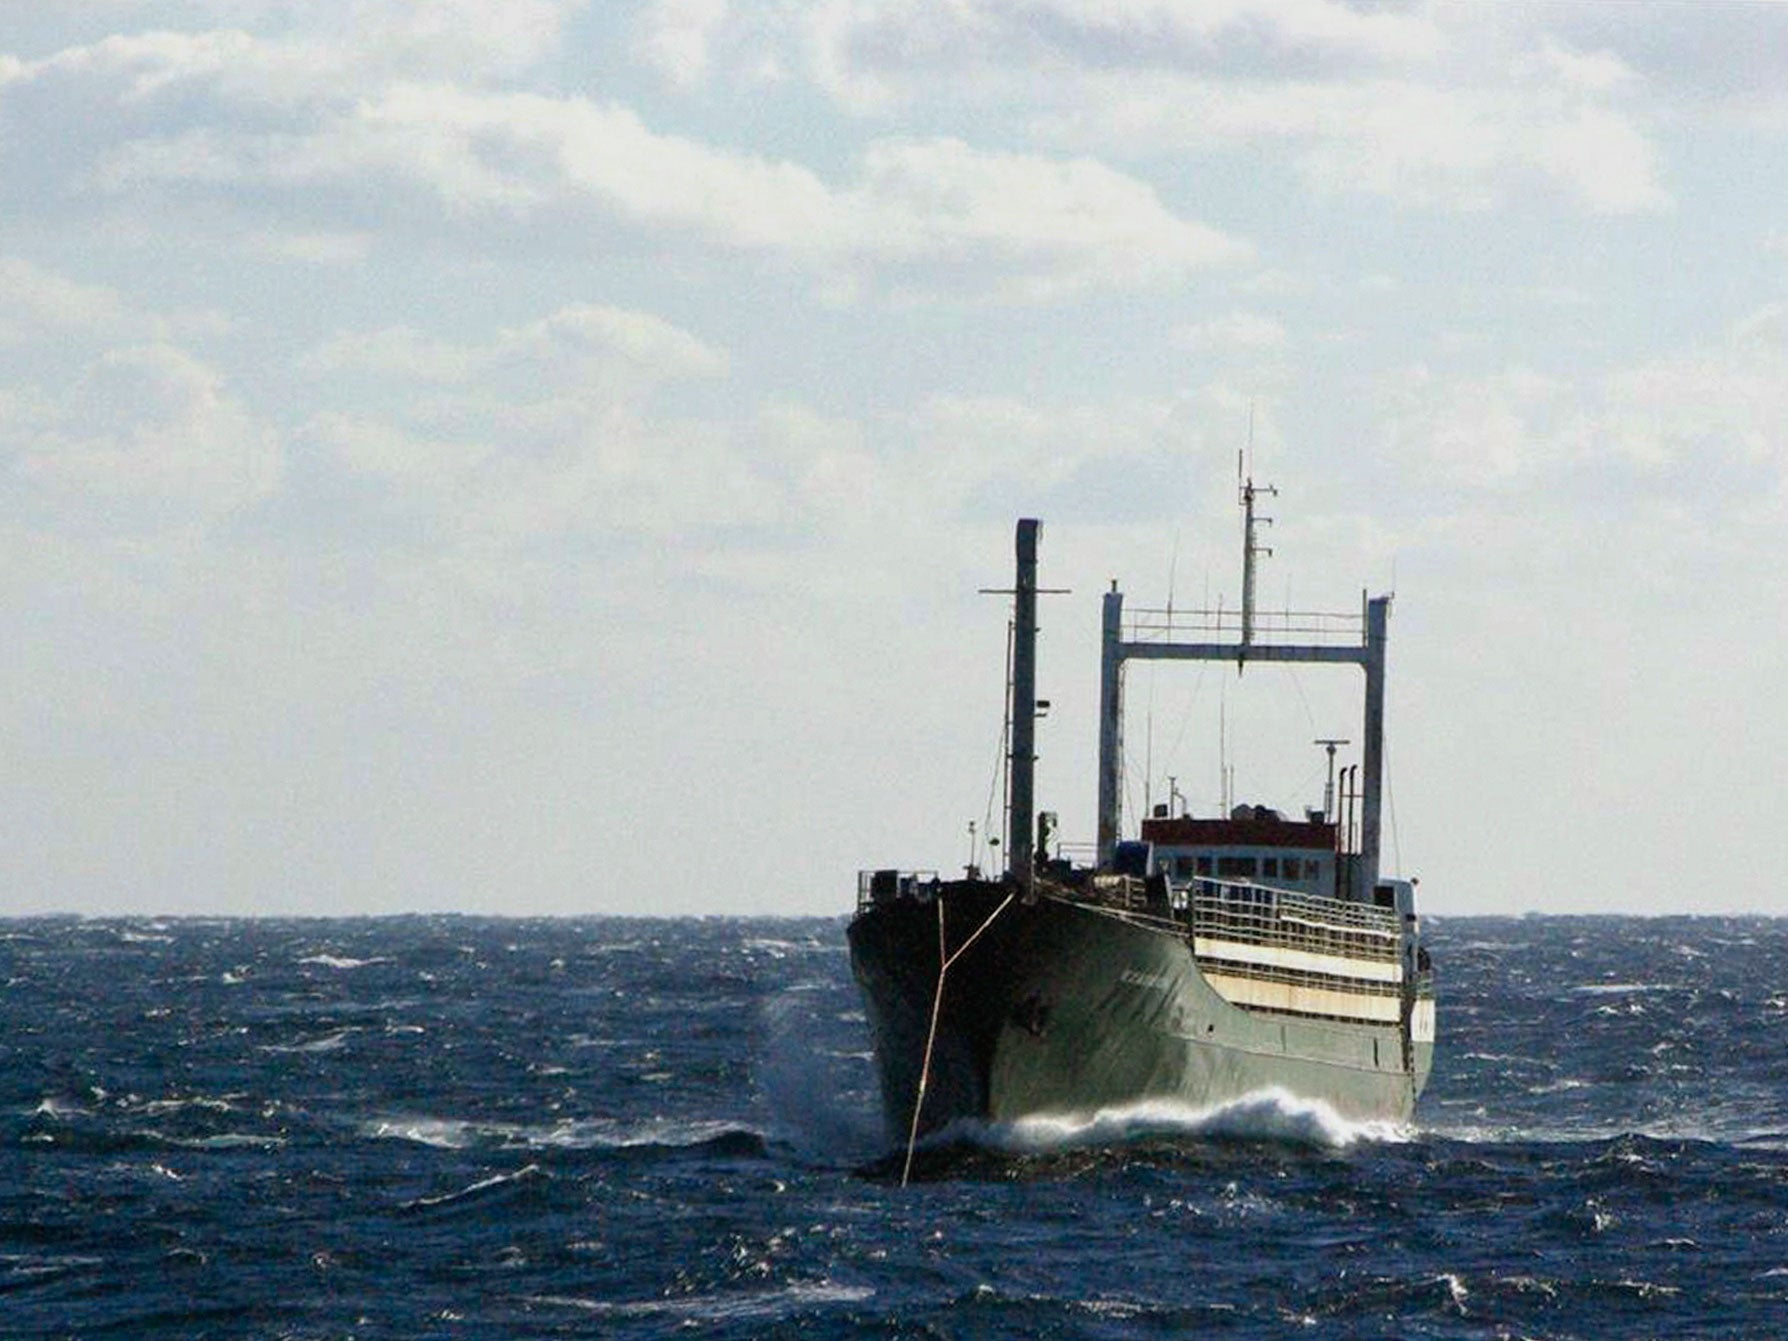 Sierra Leone-flagged Ezadeen vessel, carrying hundreds of migrants, is towed by the Icelandic Coast Guard vessel Tyr in rough seas in the Mediterranean sea off Italy's south coast in this handout provided by the Icelandic Coast Guard January 2, 2015.